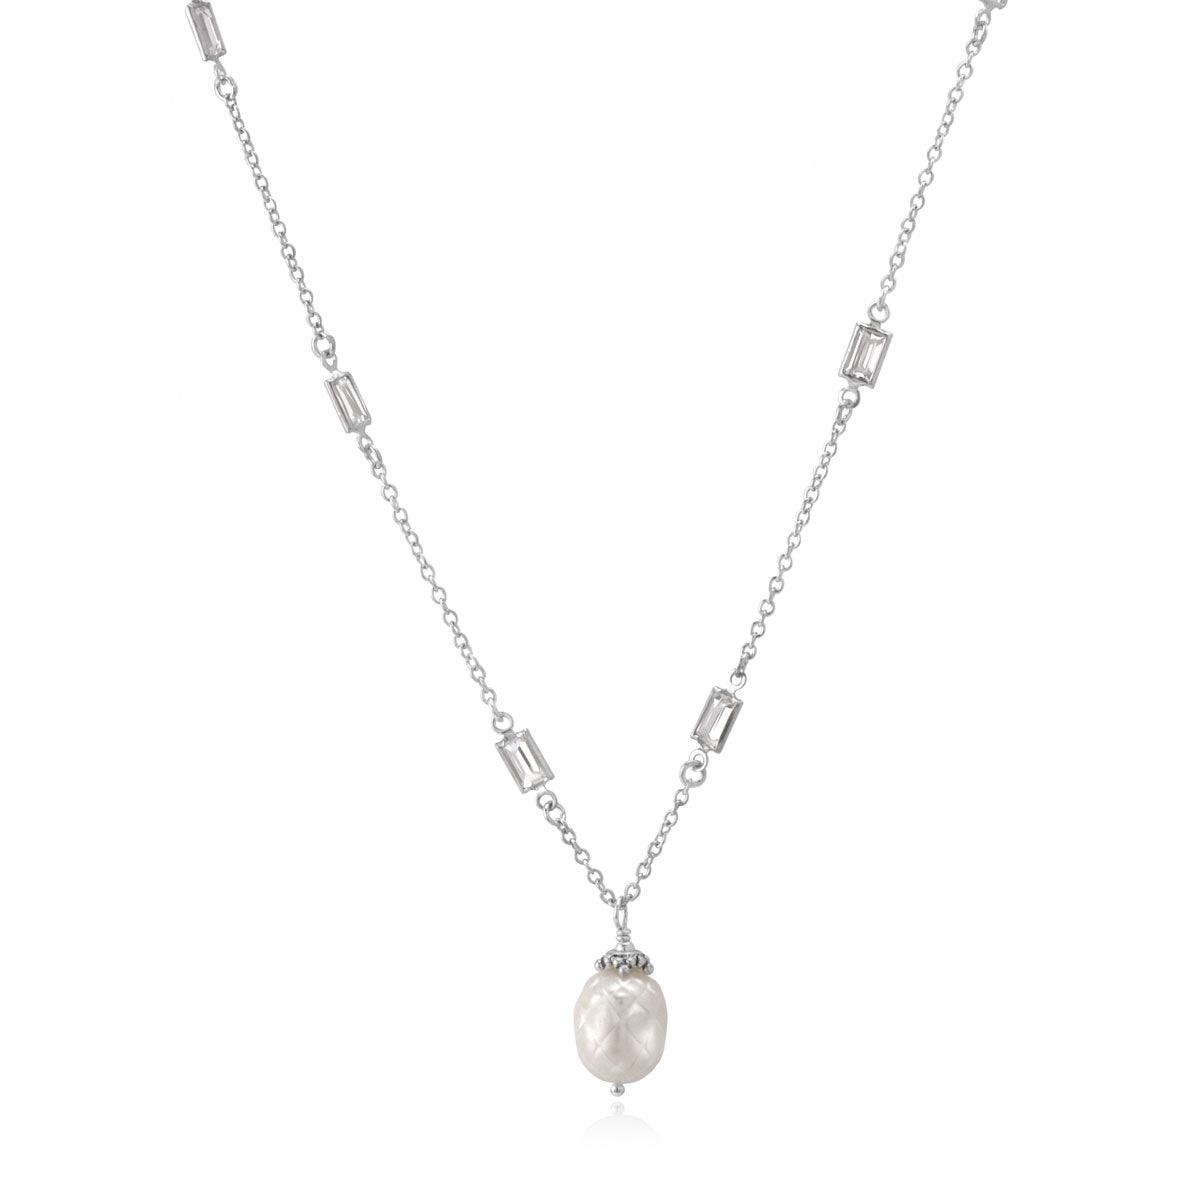 Faceted Freshwater Pearl Necklace